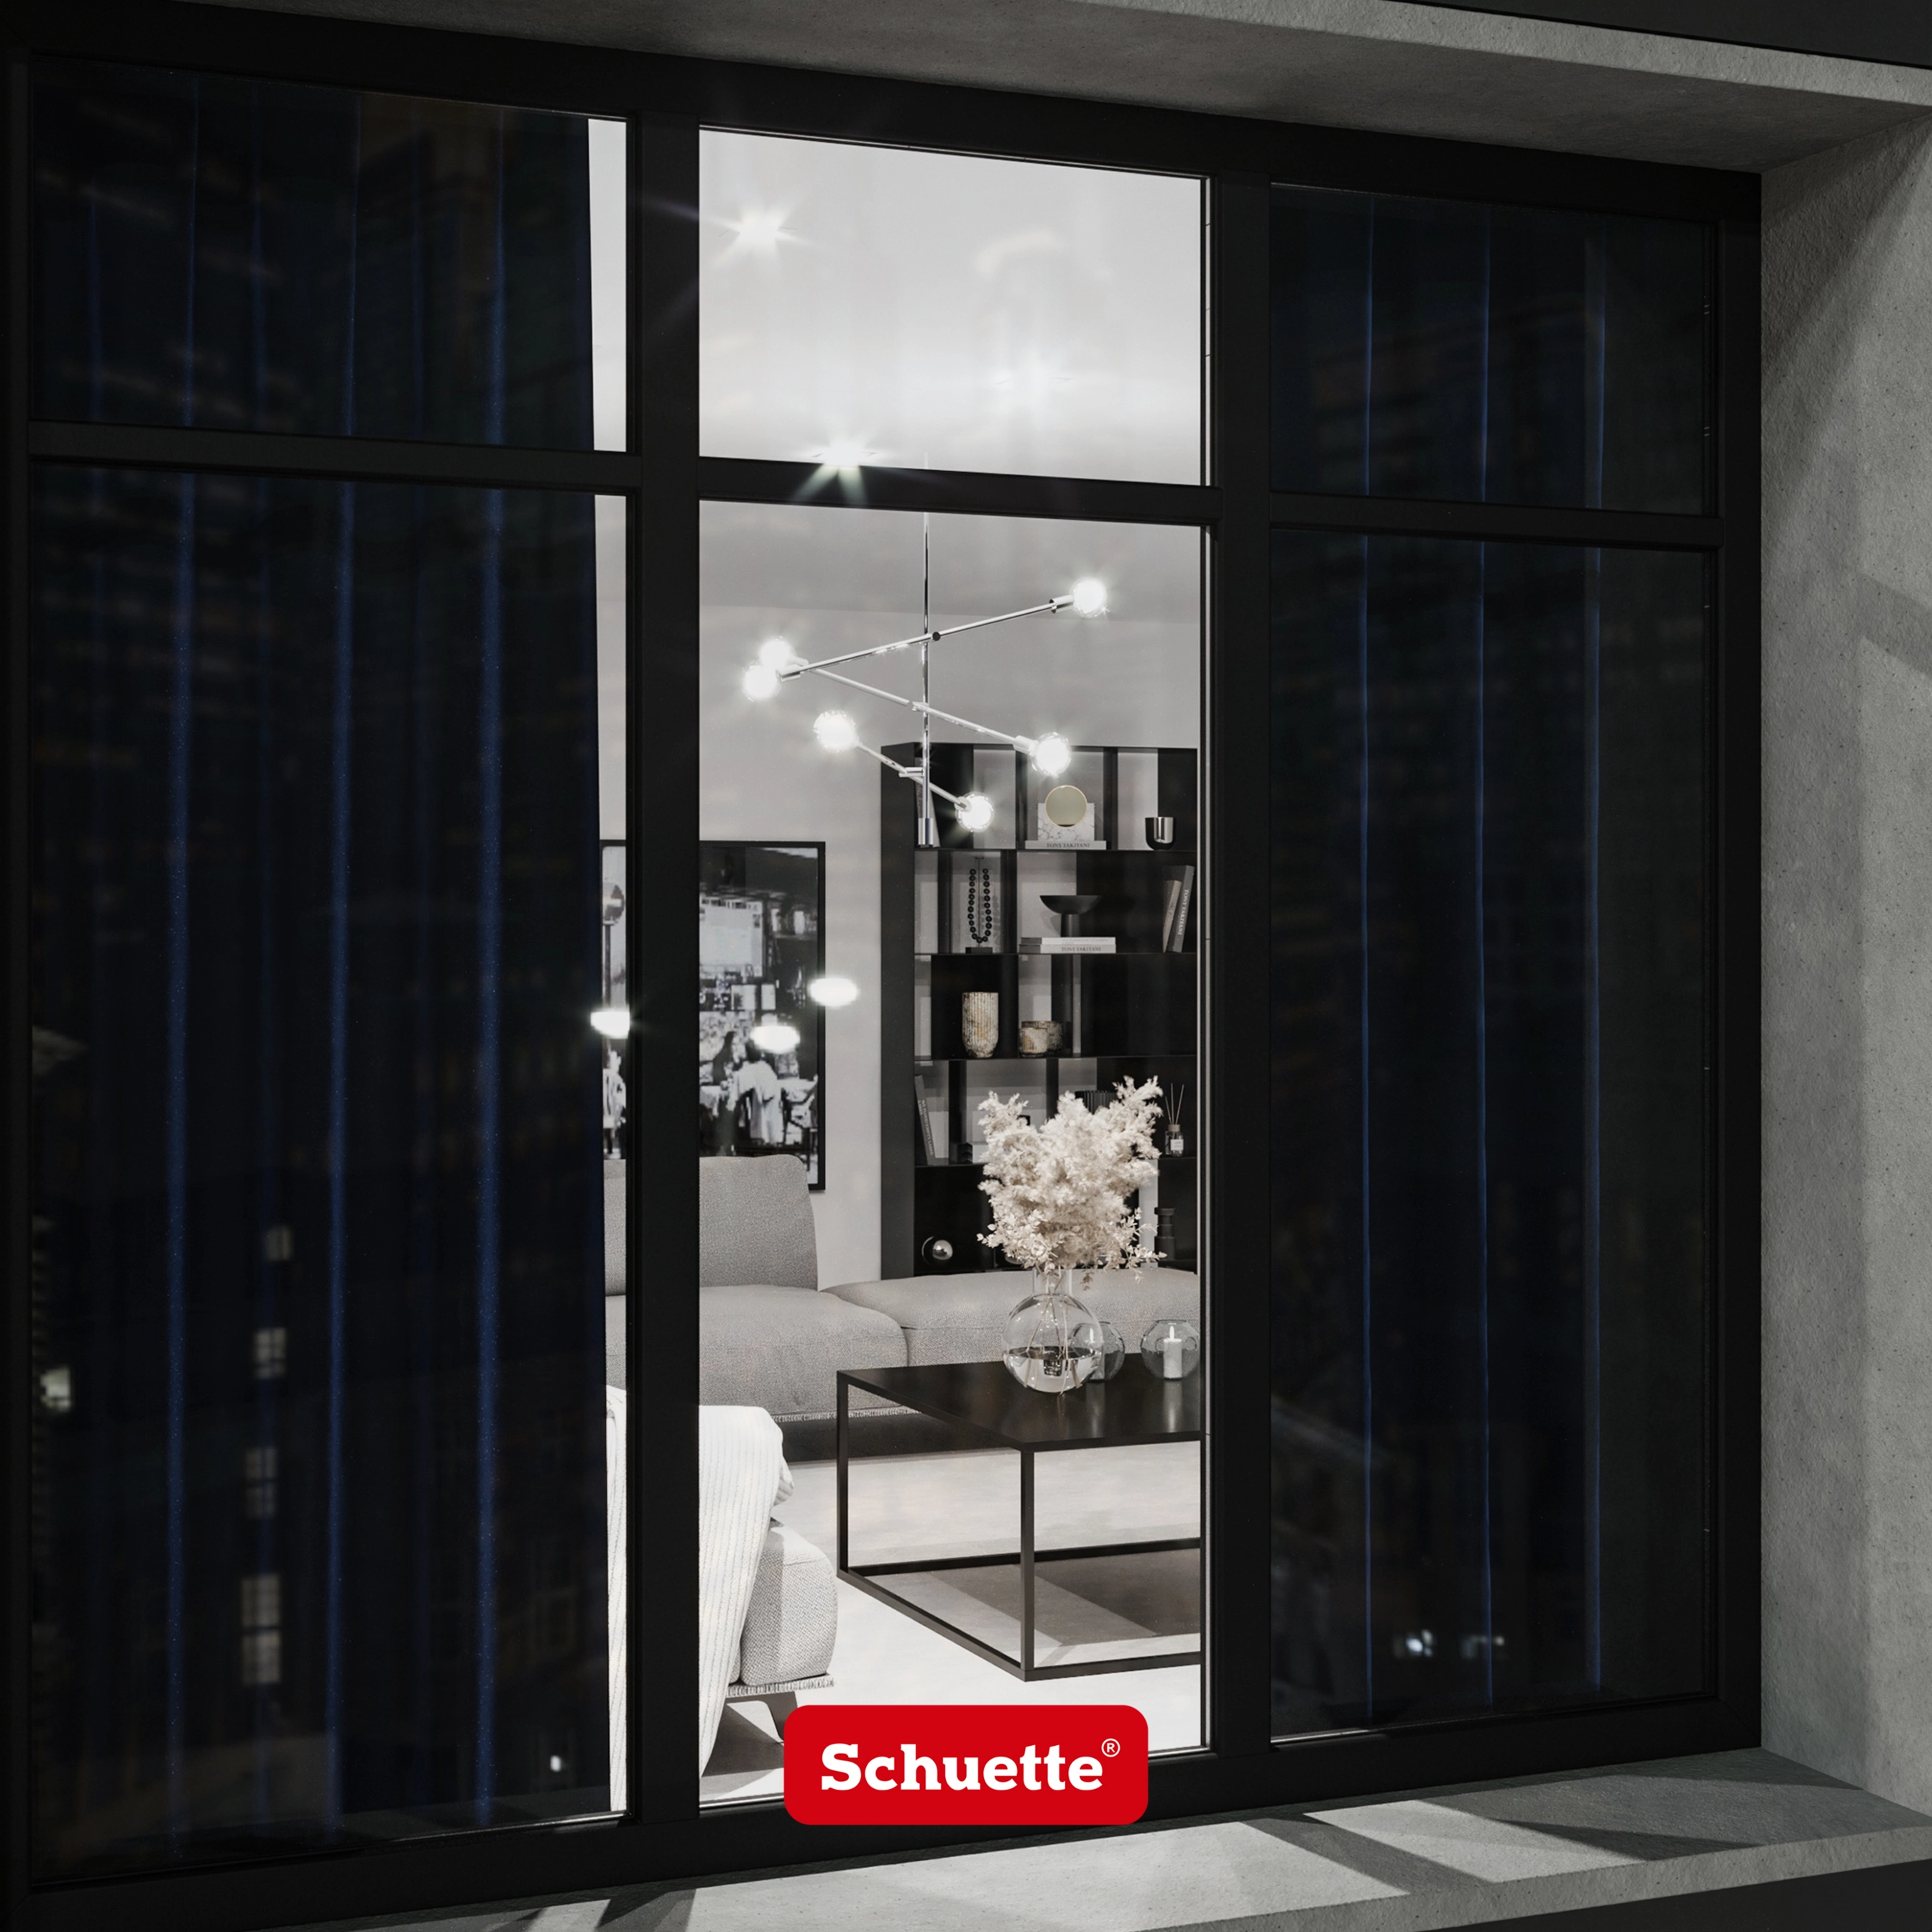 Schuette® Blackout Curtain with Eyelets ● Millenium Velvet Collection: Anchor (Blue) ● 1 piece ● Crease-resistant Easy-care Thermo Opaque & heavily darkening